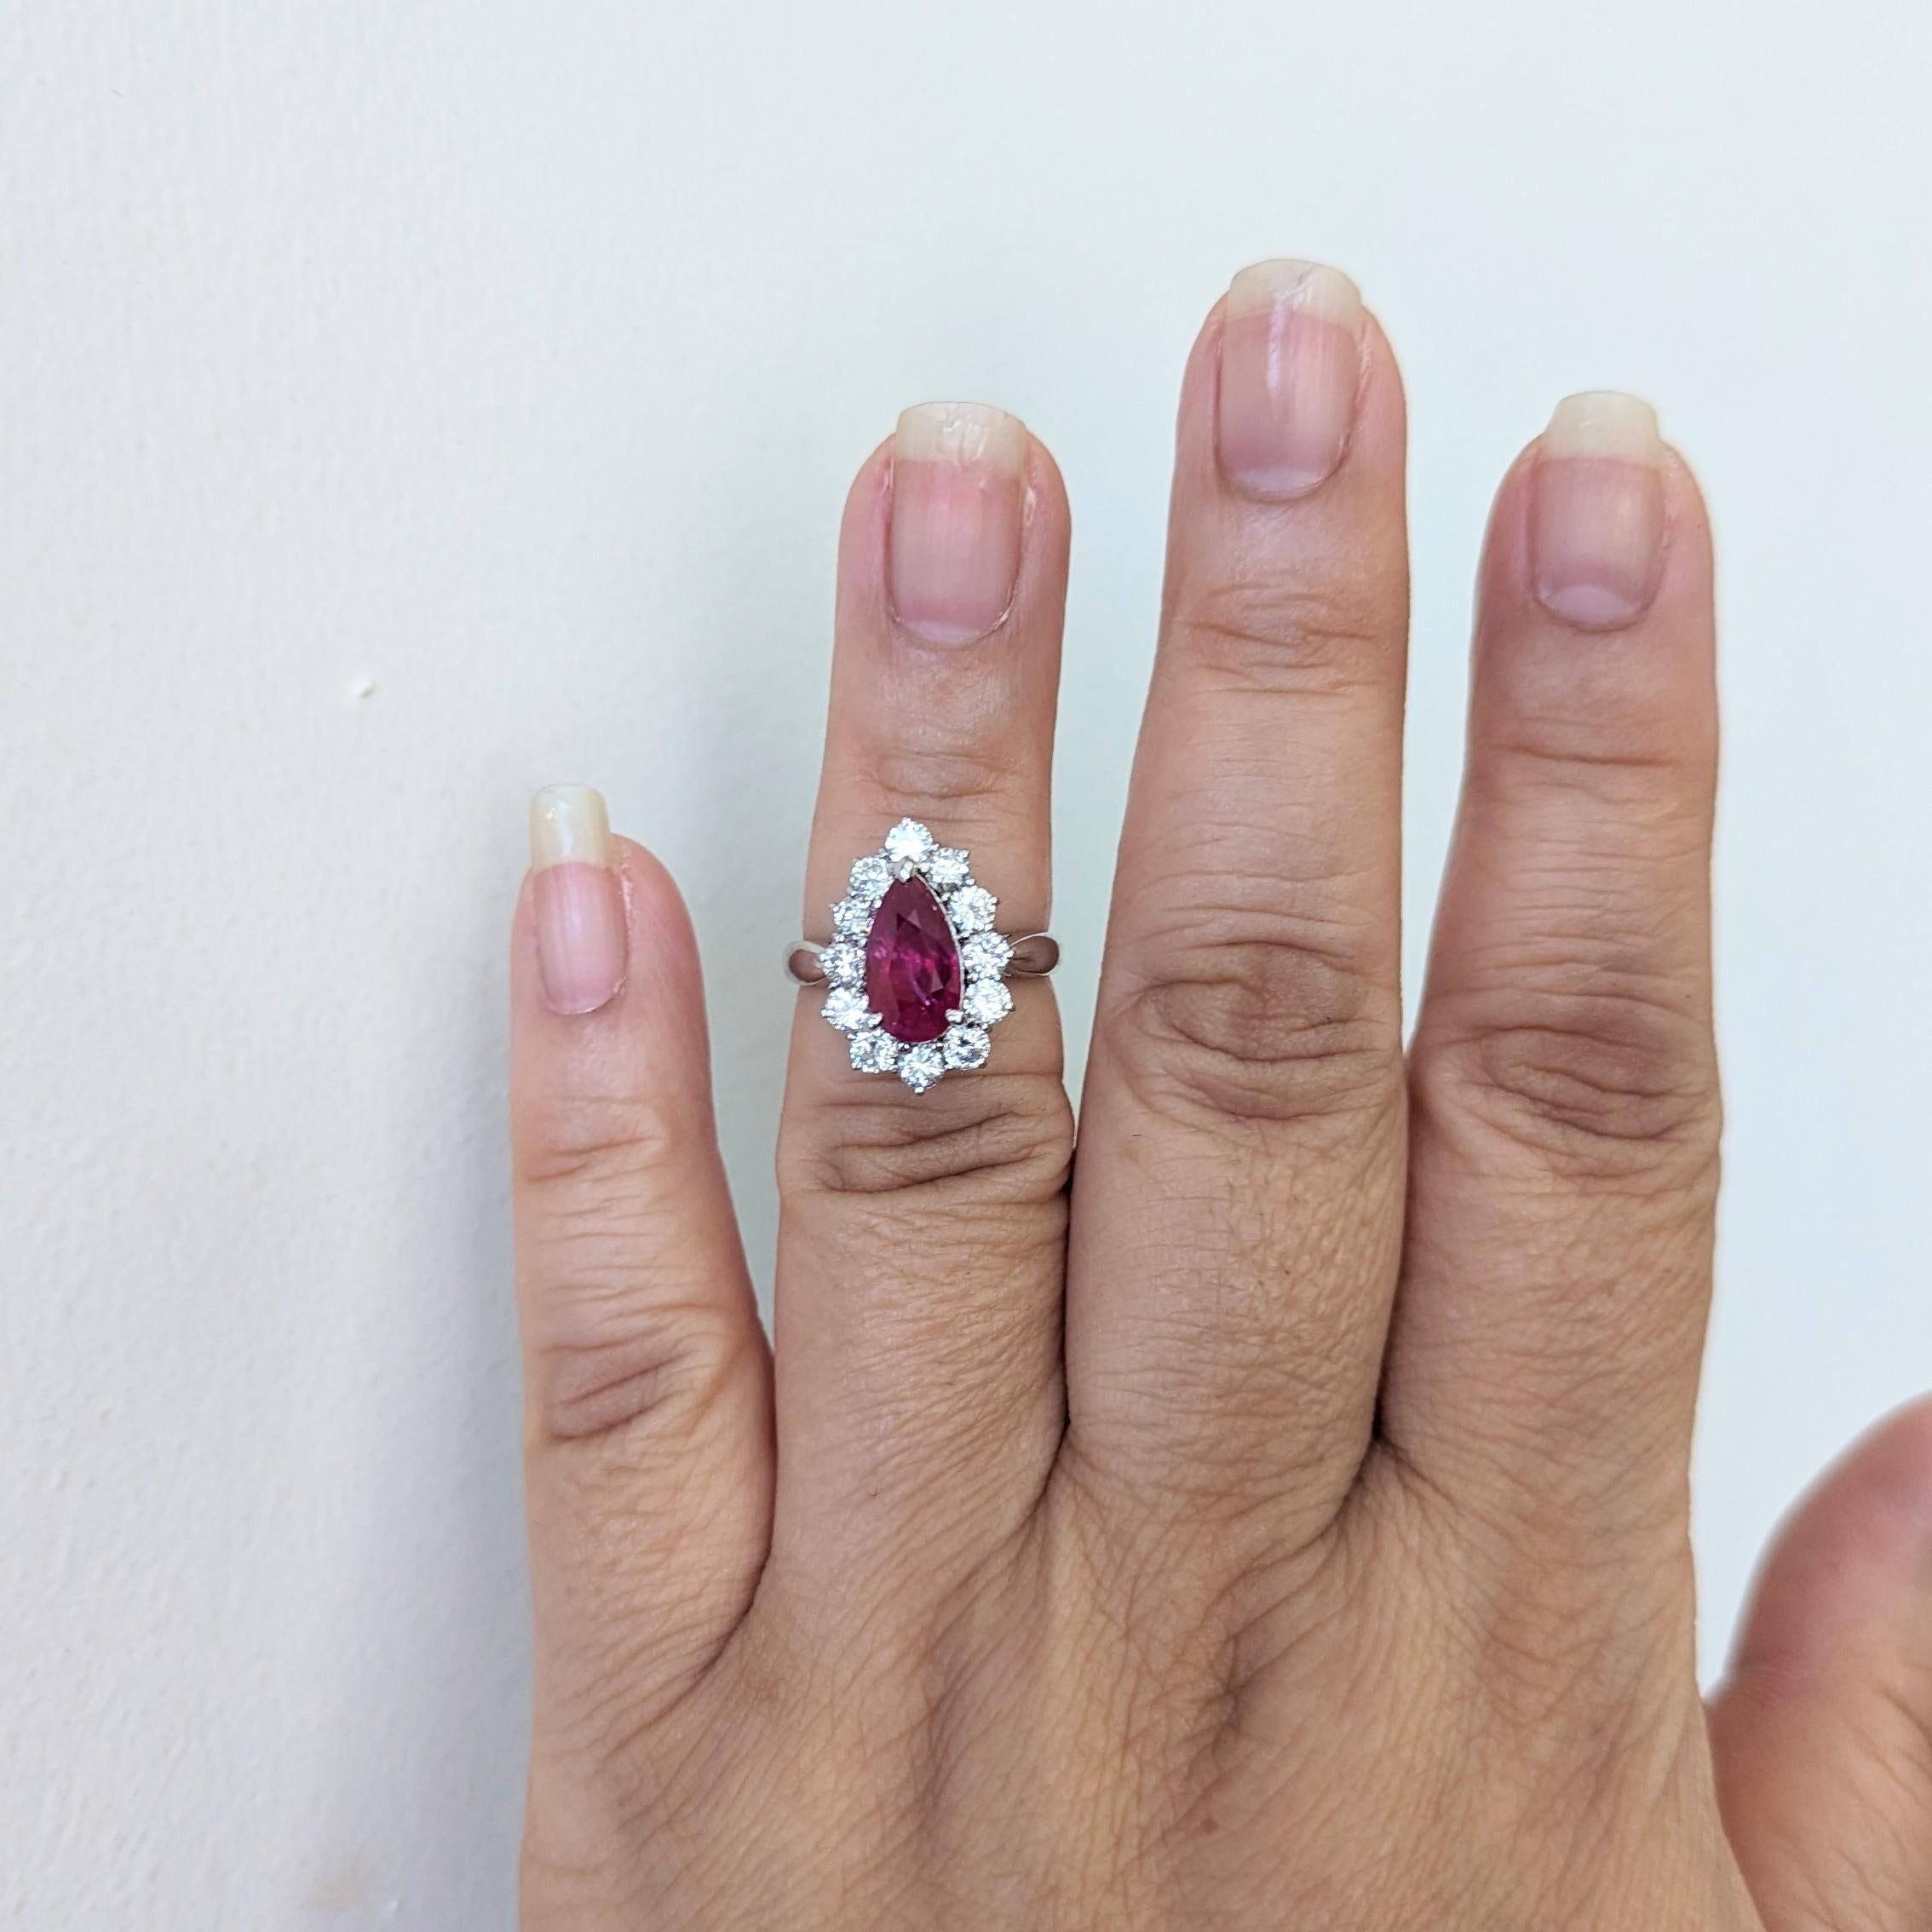 Gorgeous 3.01 ct. unheated Mozambique purplish red ruby pear shape with 1.24 ct. white diamond rounds.  Handmade in platinum.  Ring size 6.25.  GIA certificate included.